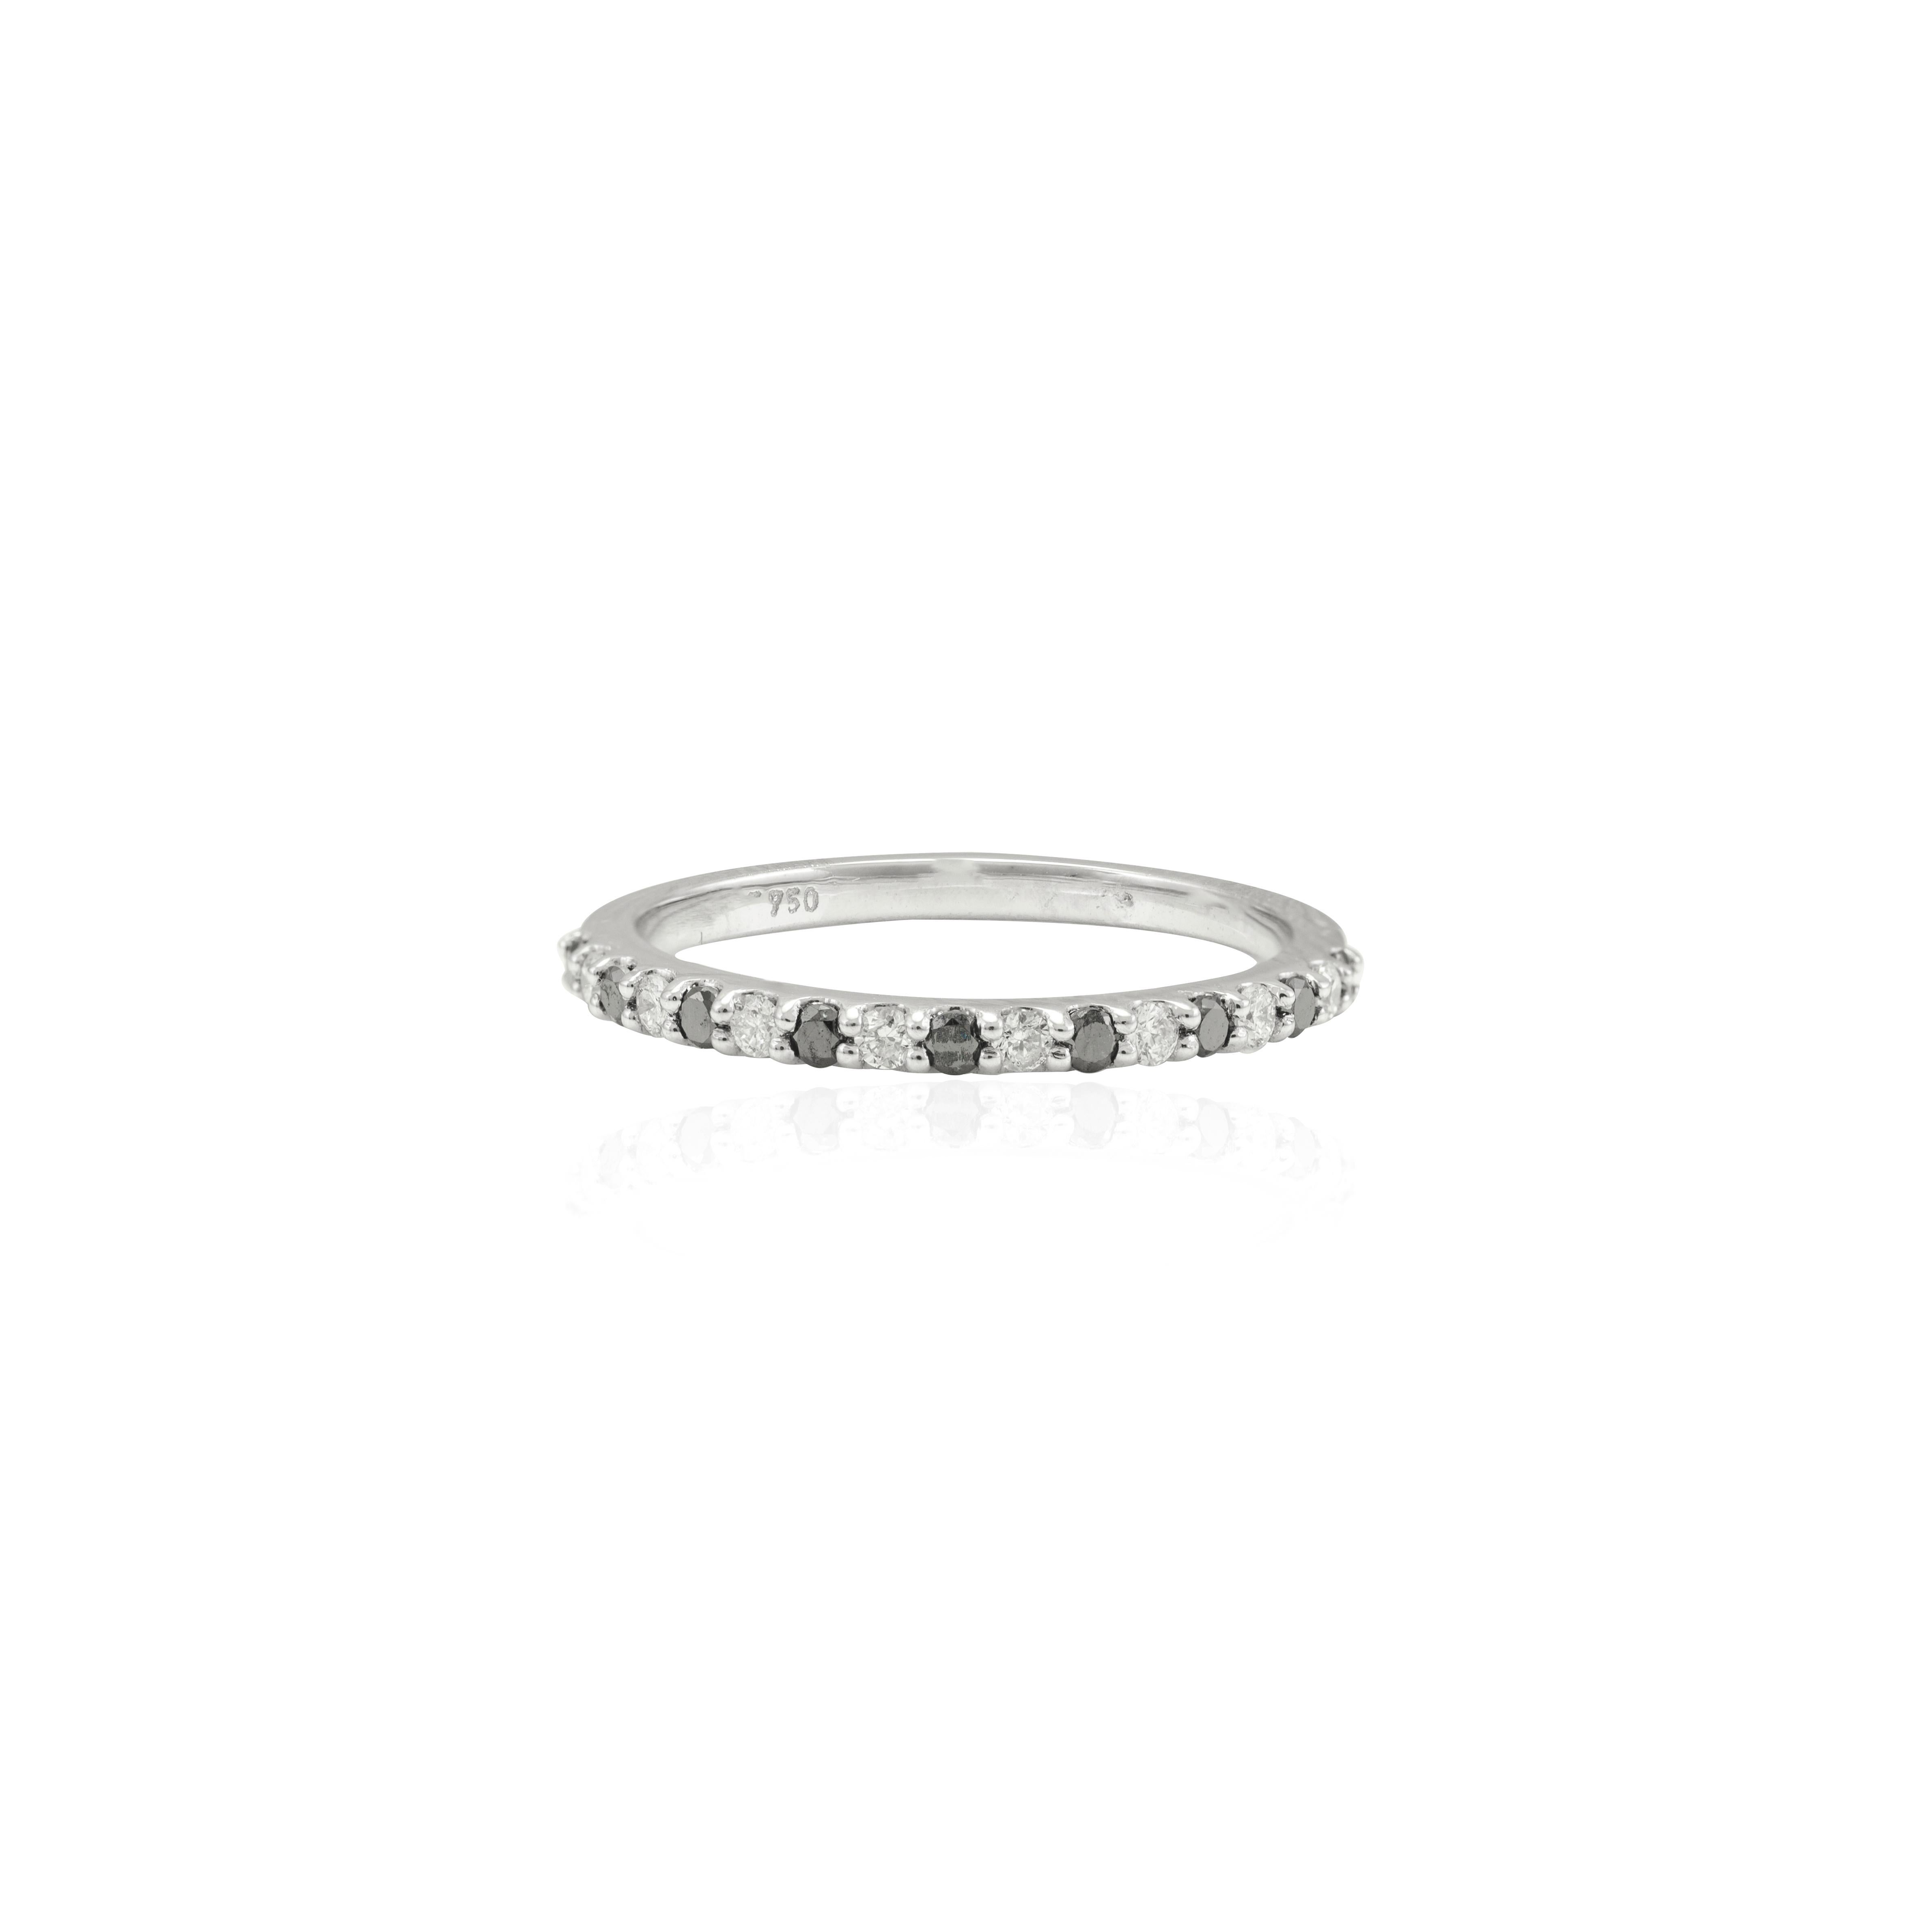 For Sale:  Natural Thin Diamond Wedding Band 18k Solid White Gold Stackable Diamond Ring 5